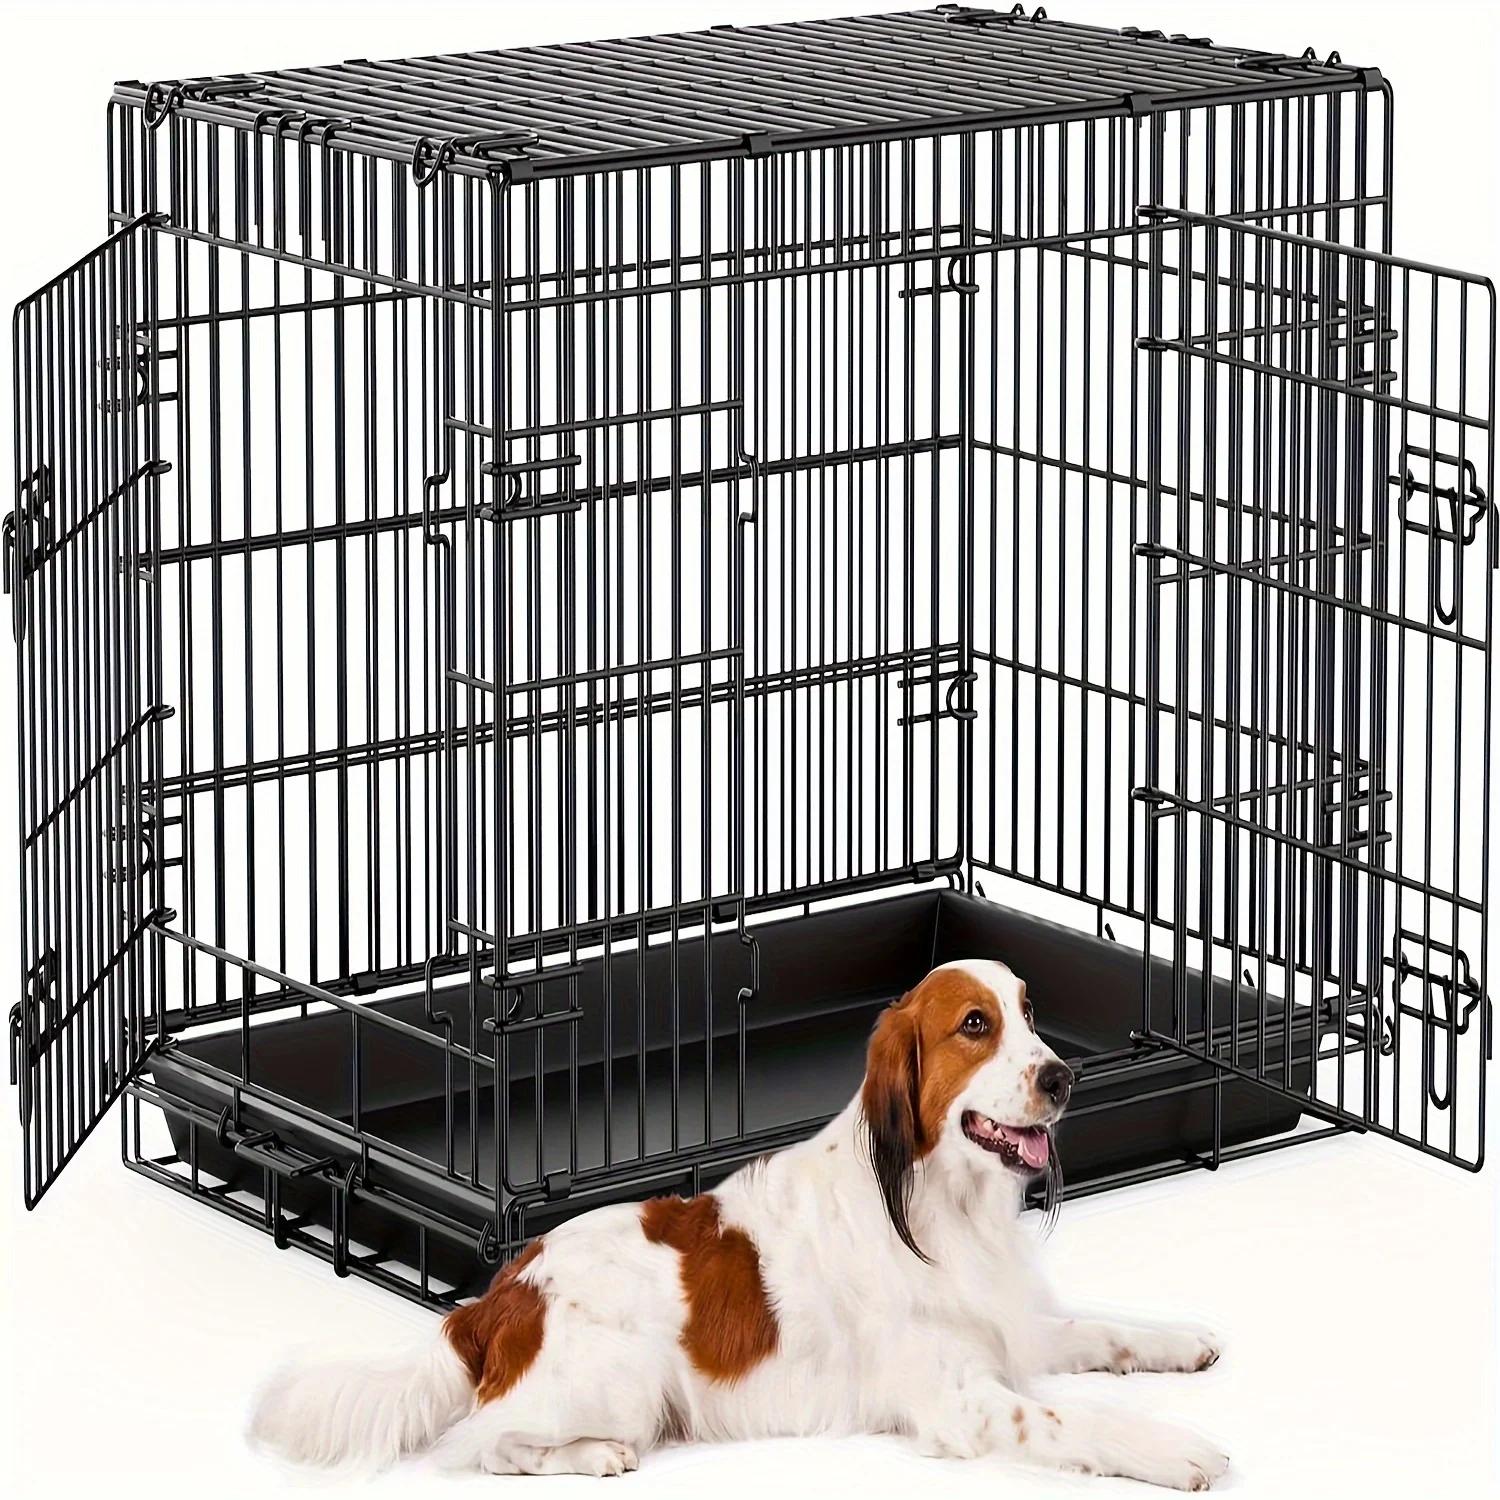 

36 Inch Small Dog Crates,Pet Kennel Double Door for Small Puppy, Cat, Folding Animal Wire Metal Cage for Travel, Outdoor, Carry,